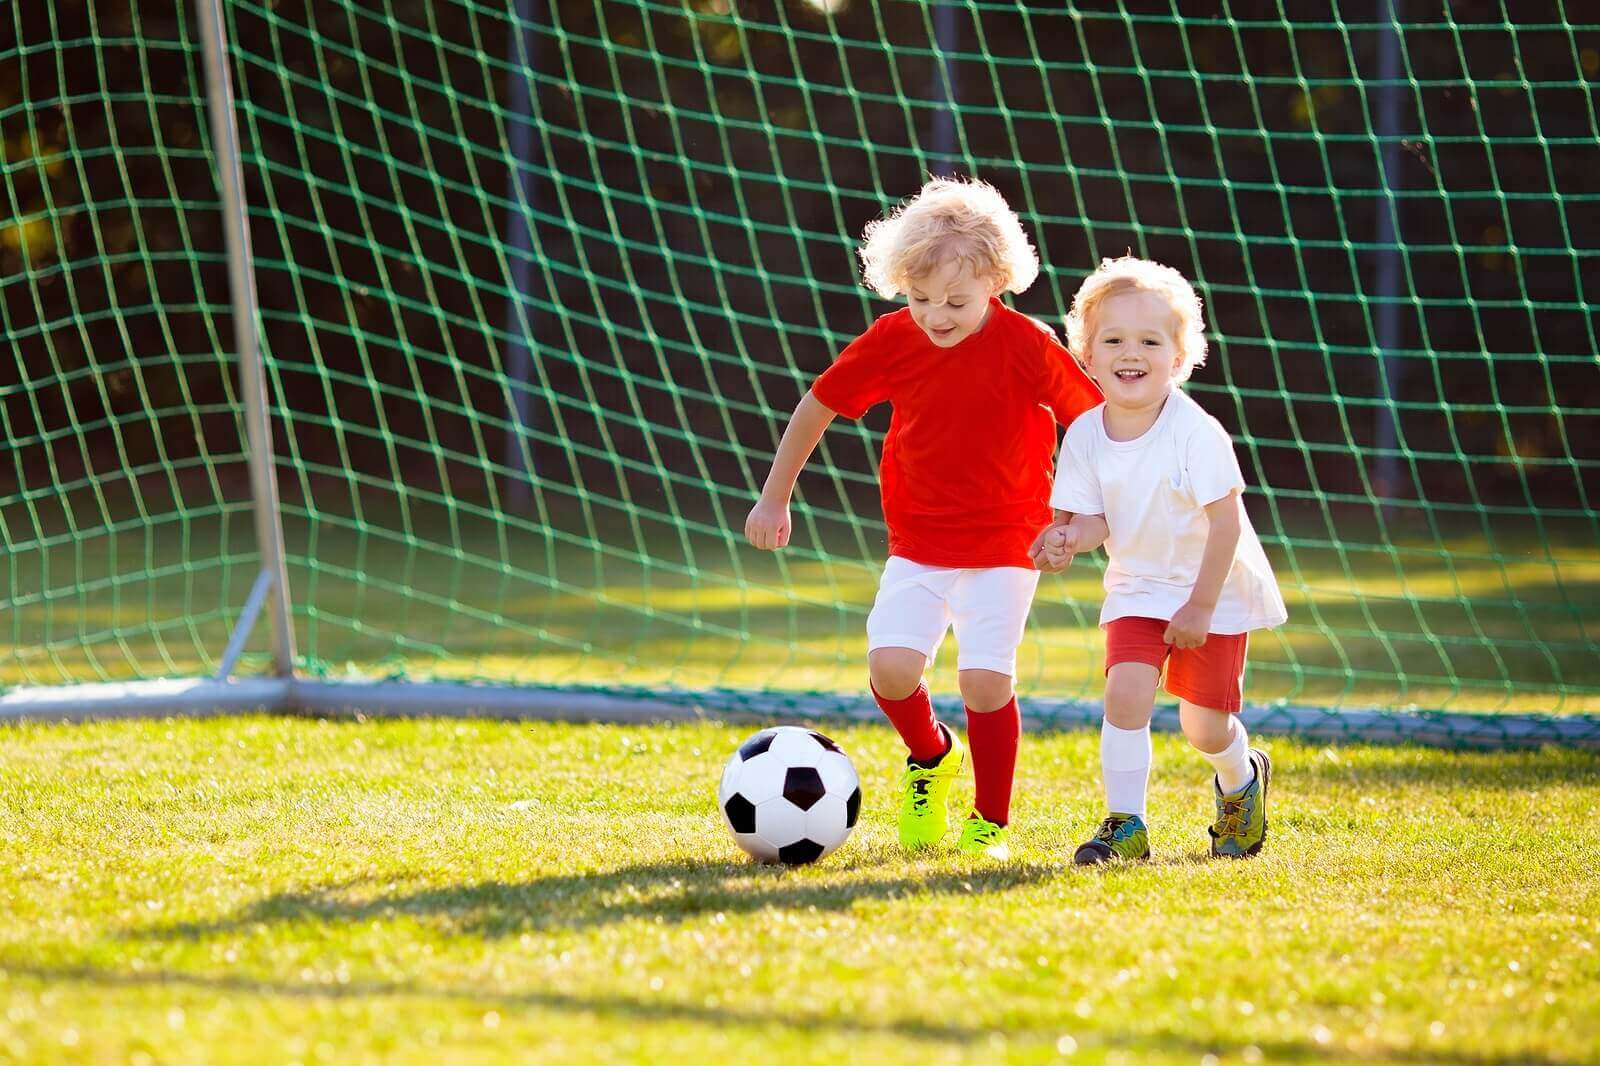 The Role of Parents in Children's Sports